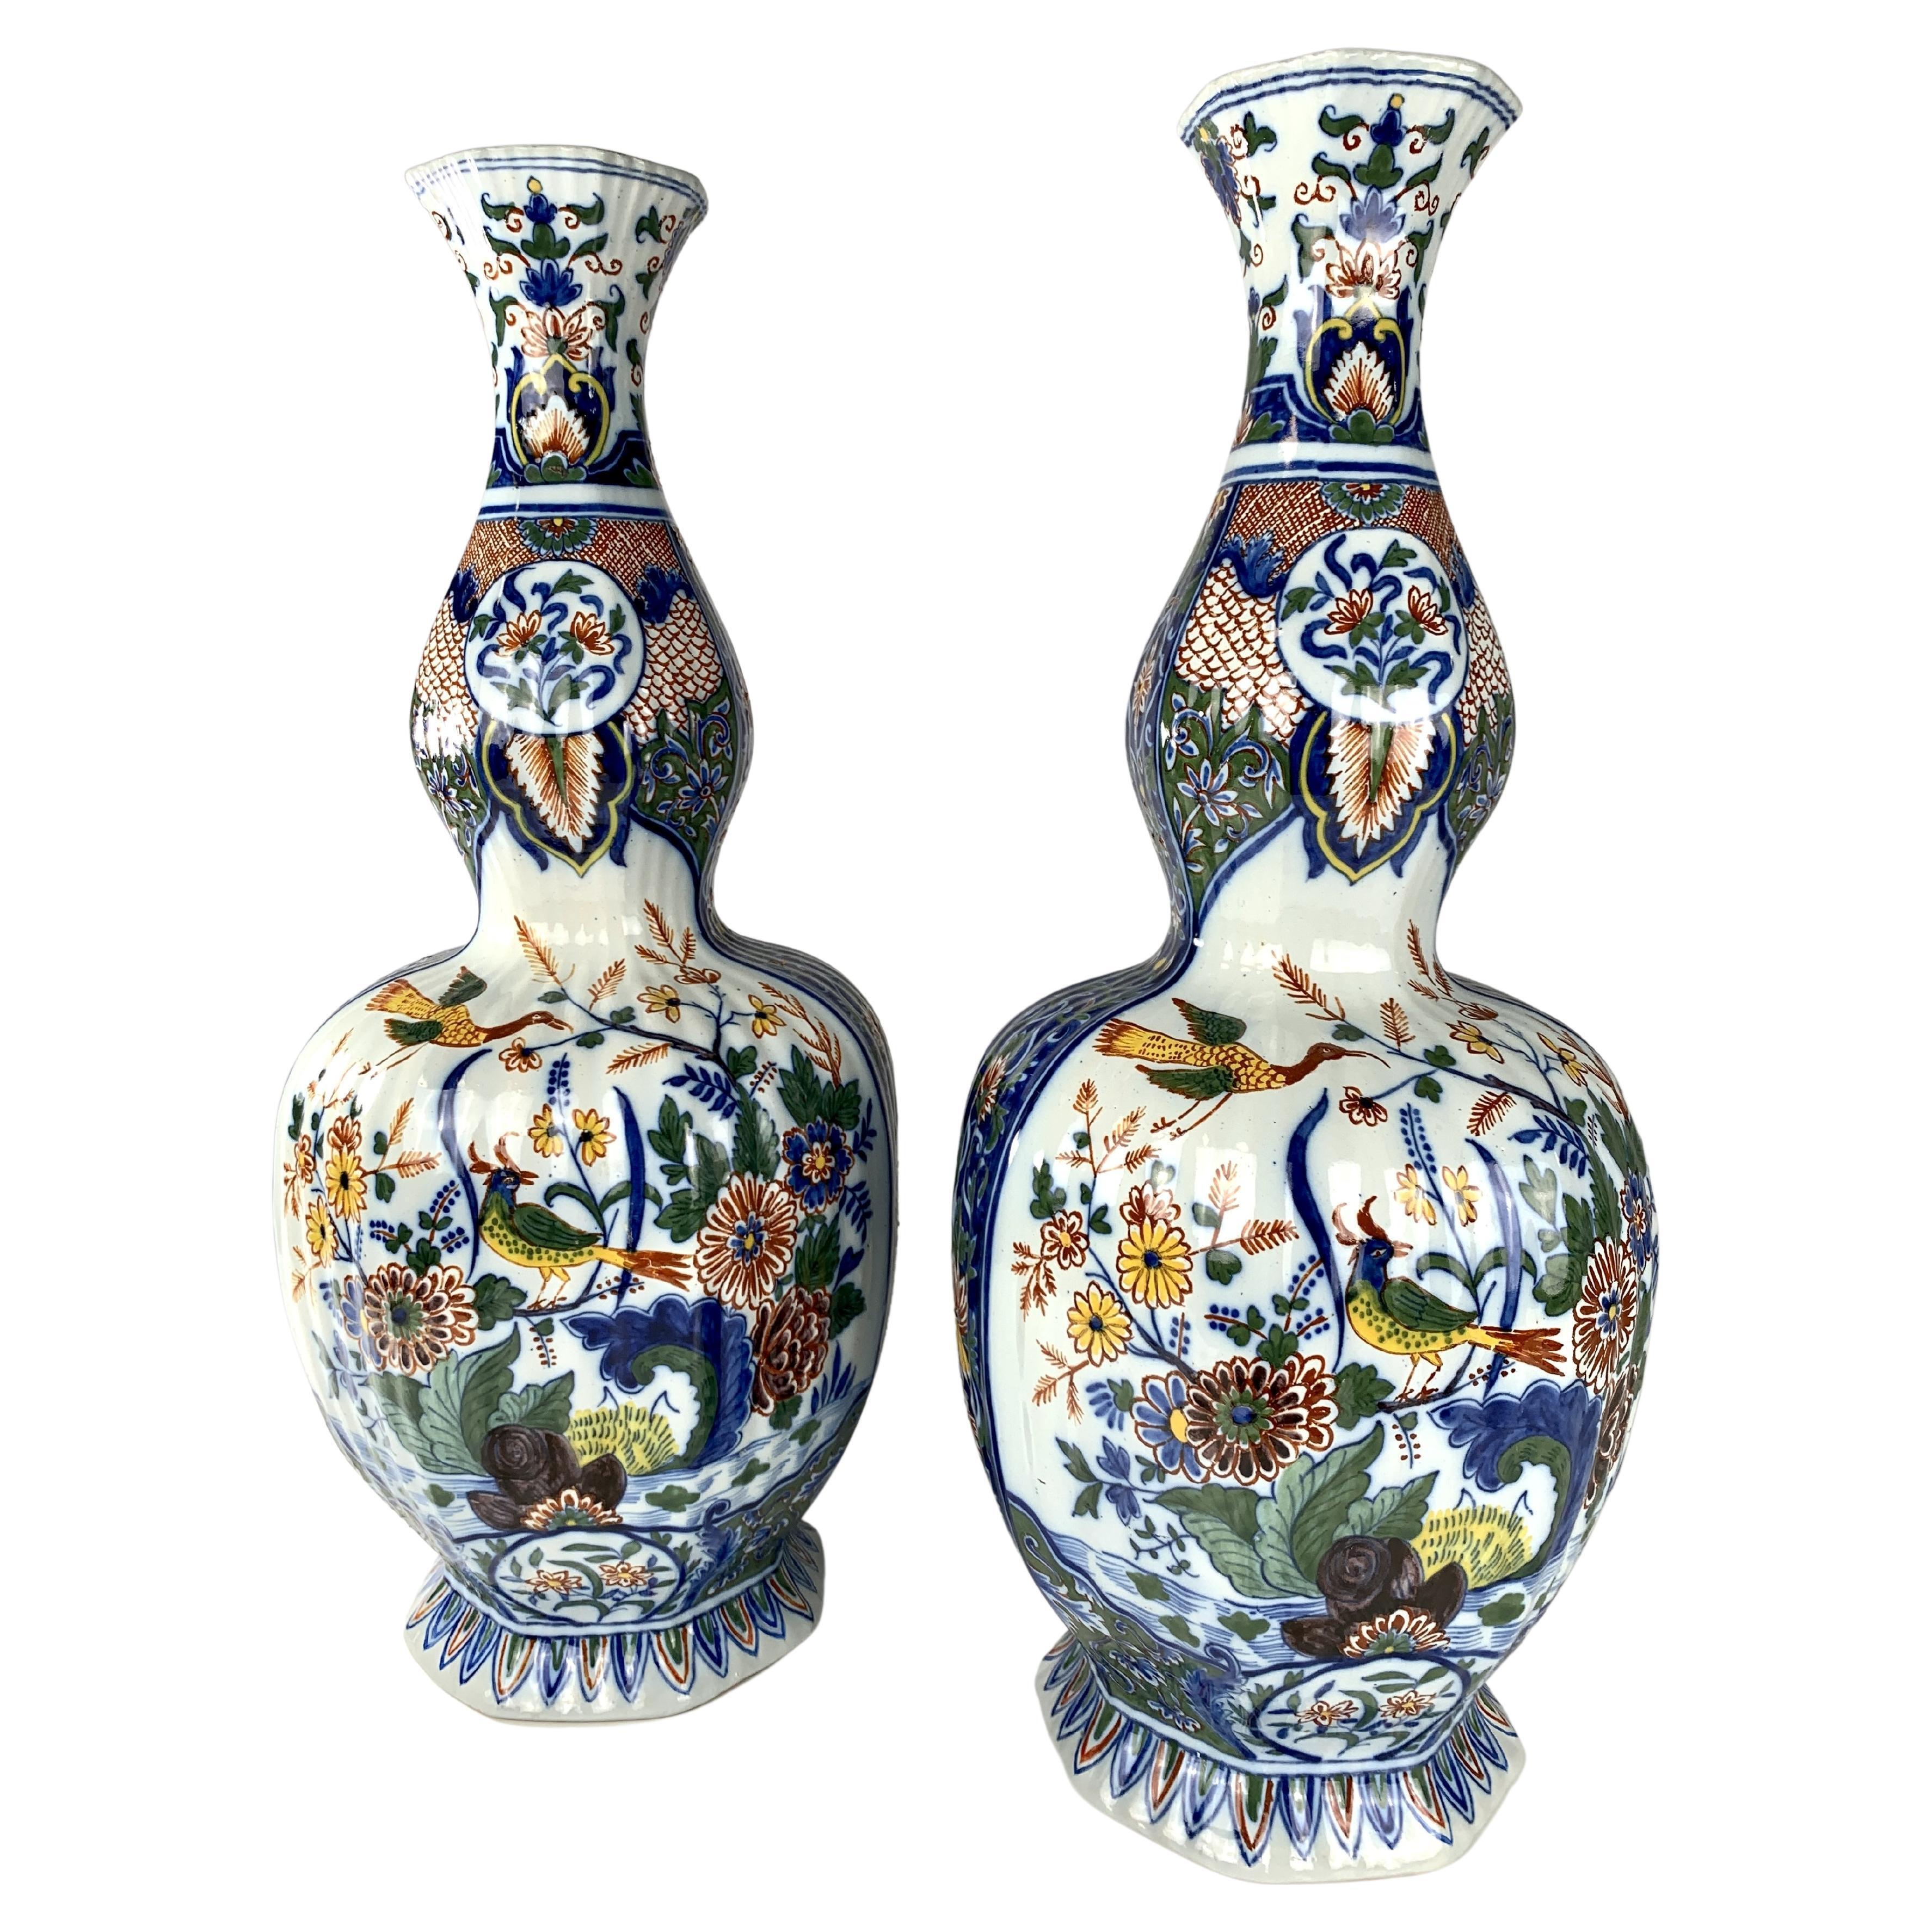 Made in the Netherlands circa 1880, this lovely pair of Dutch Delft mantle vases have a traditional double gourd shape.  
The vases were painted in traditional polychrome colors showing a waterside scene filled with flowers and songbirds. 
Panels